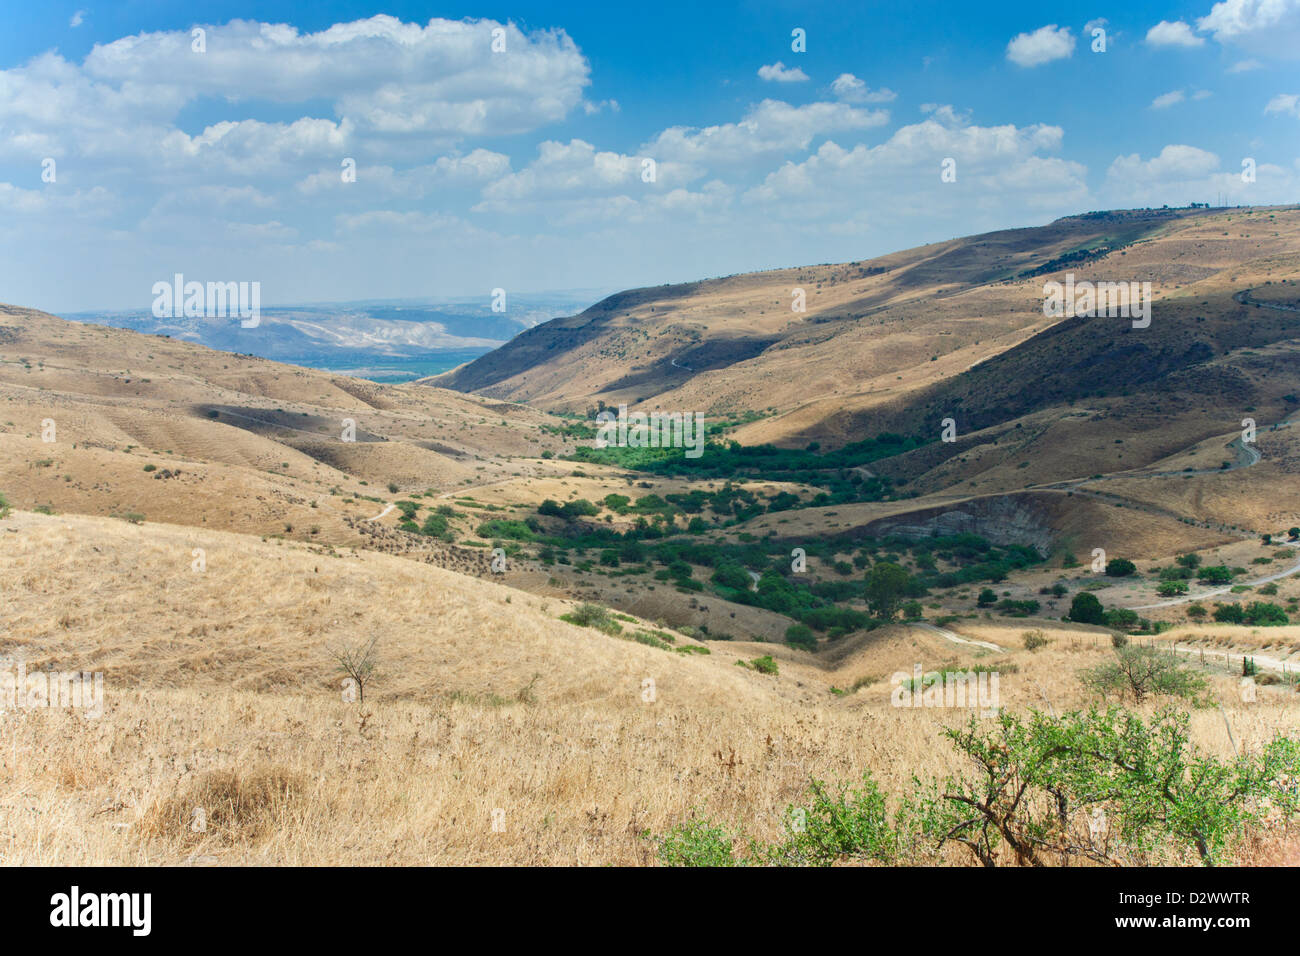 Israel. A mountainous view in the lower Galillee, with the Edom Mountains of Jordan in the background. Stock Photo